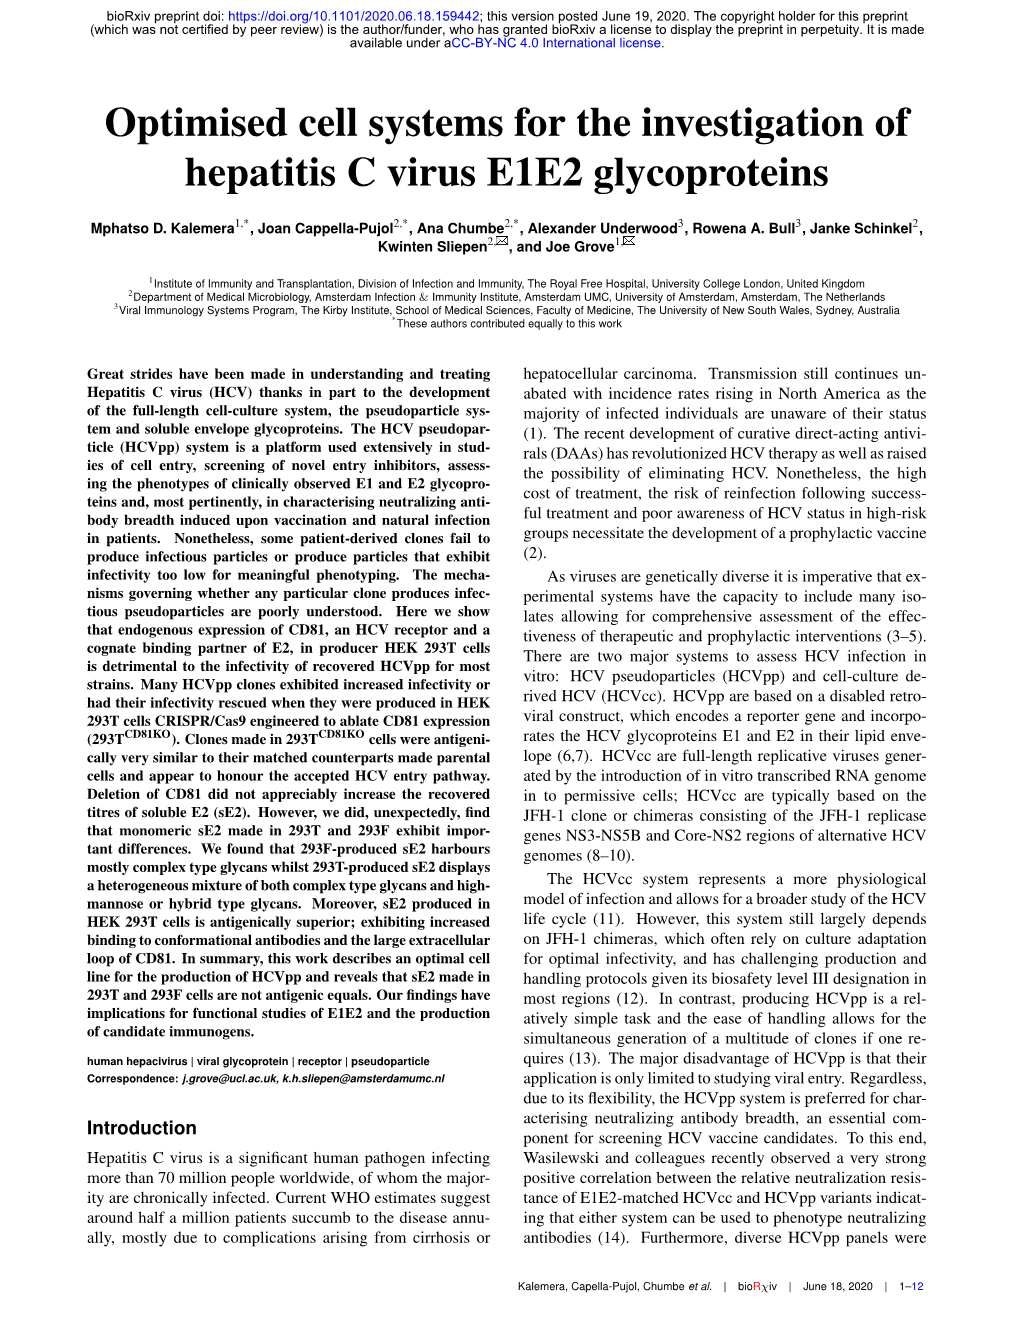 Optimised Cell Systems for the Investigation of Hepatitis C Virus E1E2 Glycoproteins